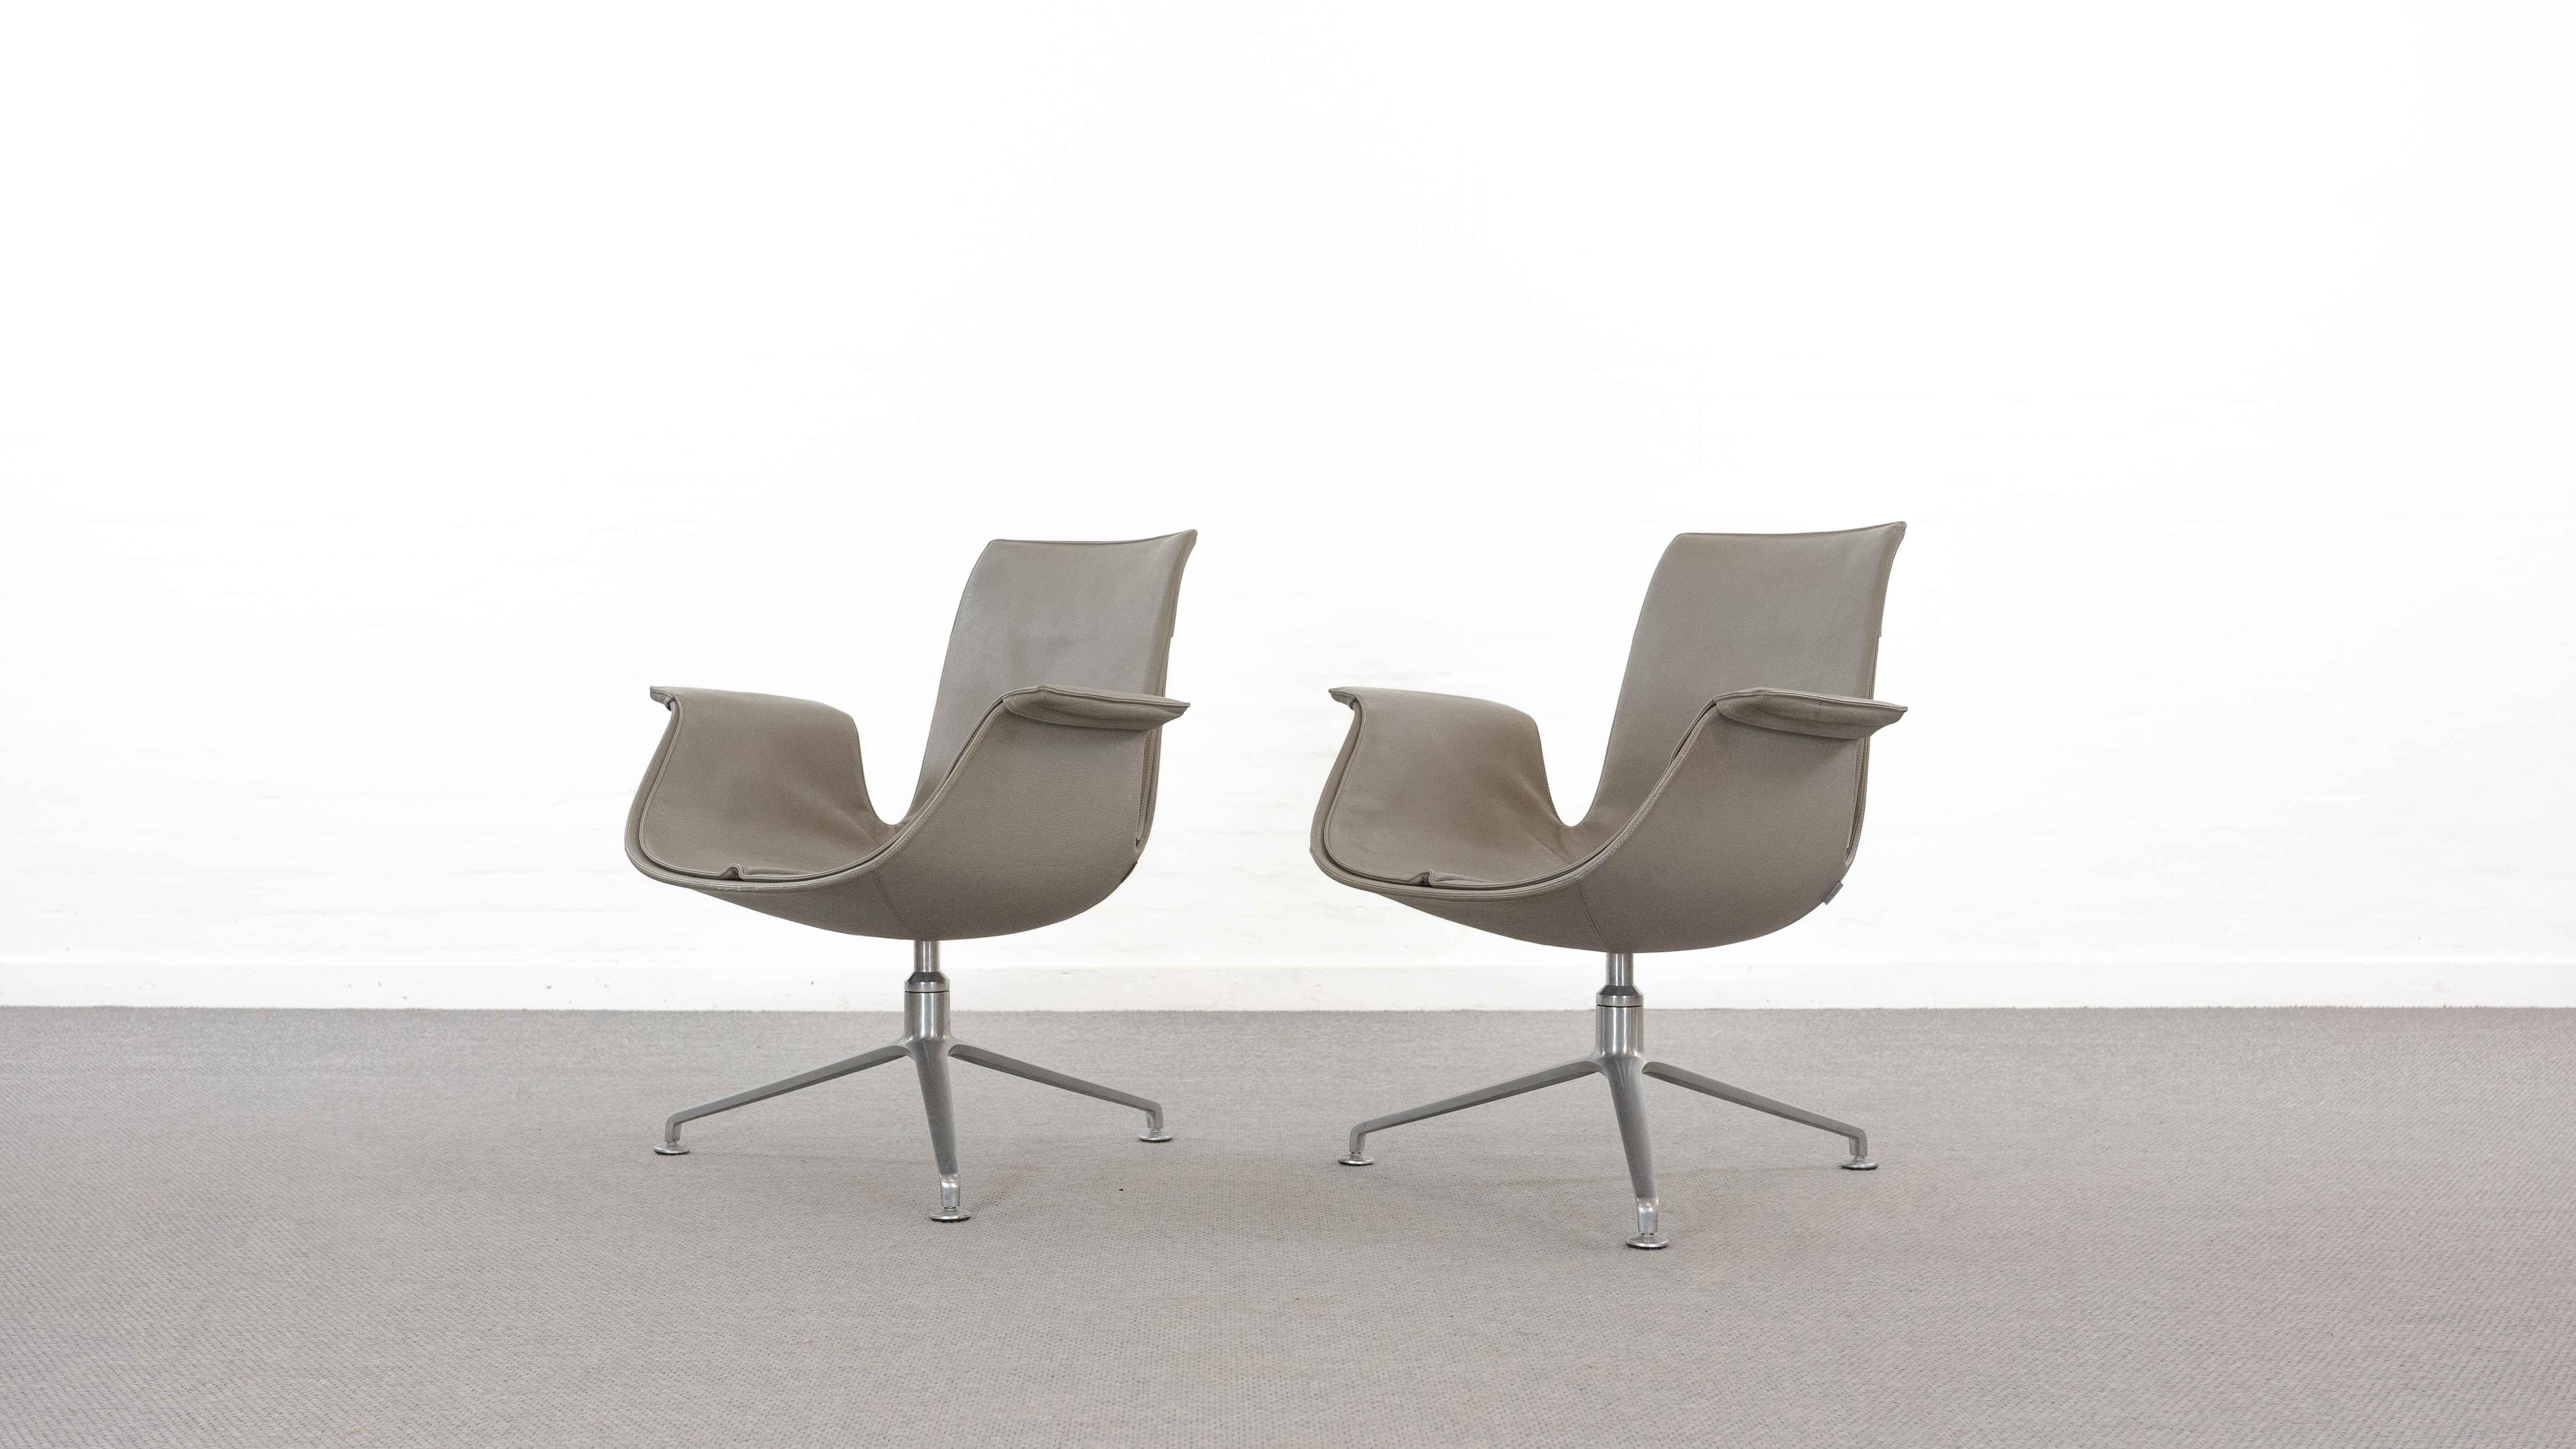 Set (2) FK lounge chairs, designed end of the 60s by the scandinavian designerduo Preben Fabricius und Jorgen Kastholm. So called Bird Chair or Tulip Chair. Manufactured by Walter Knoll. The swivel chairs are upholstered in its grey leather and rest